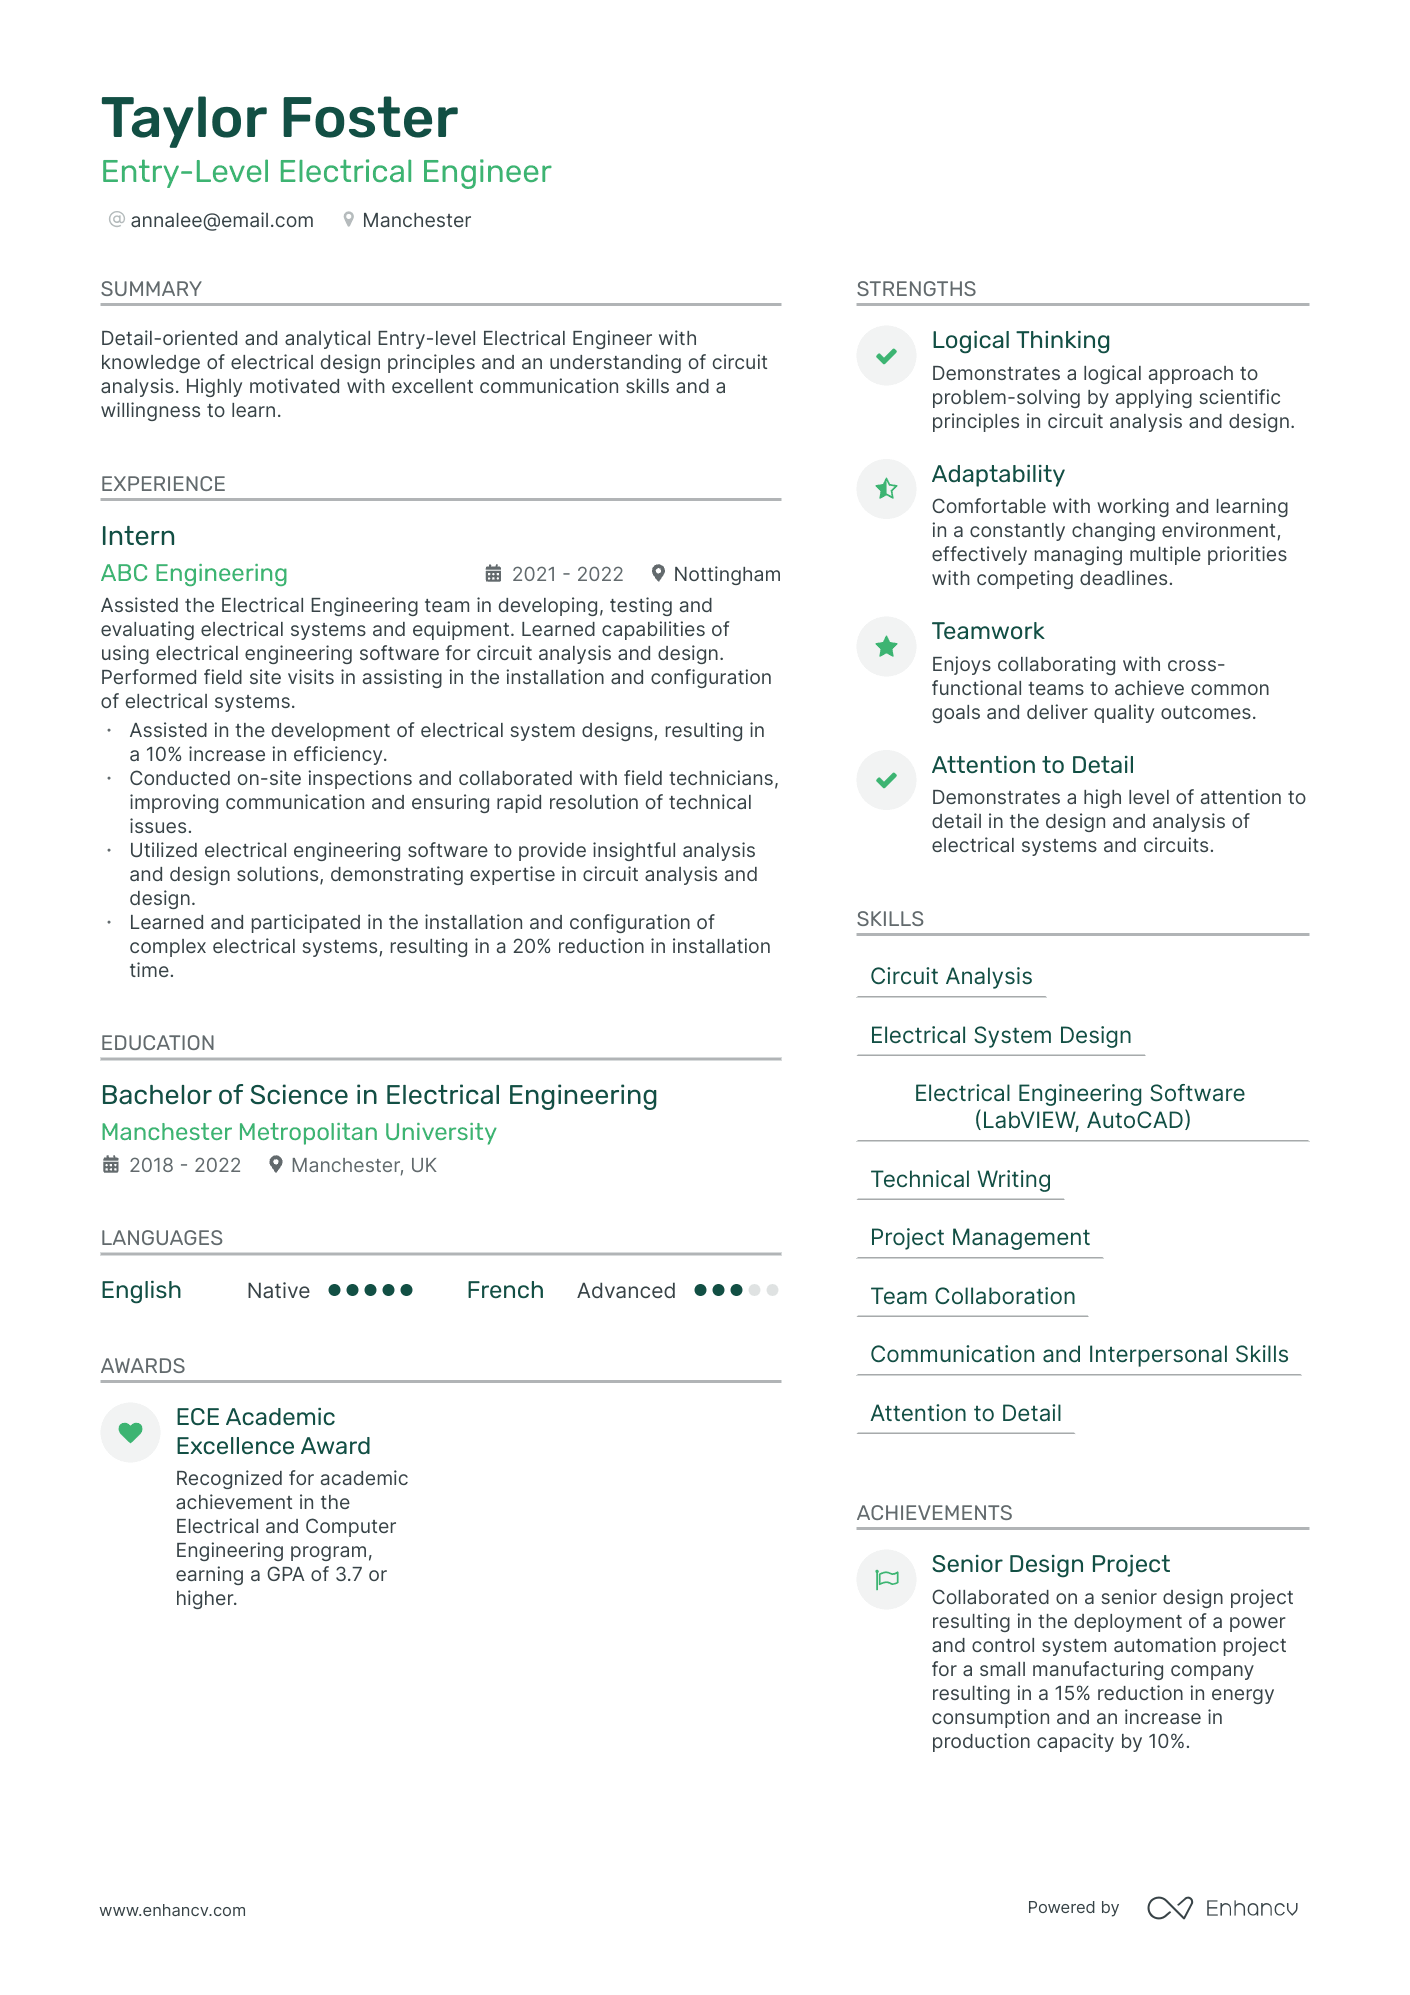 Entry Level Electrical Engineer CV example